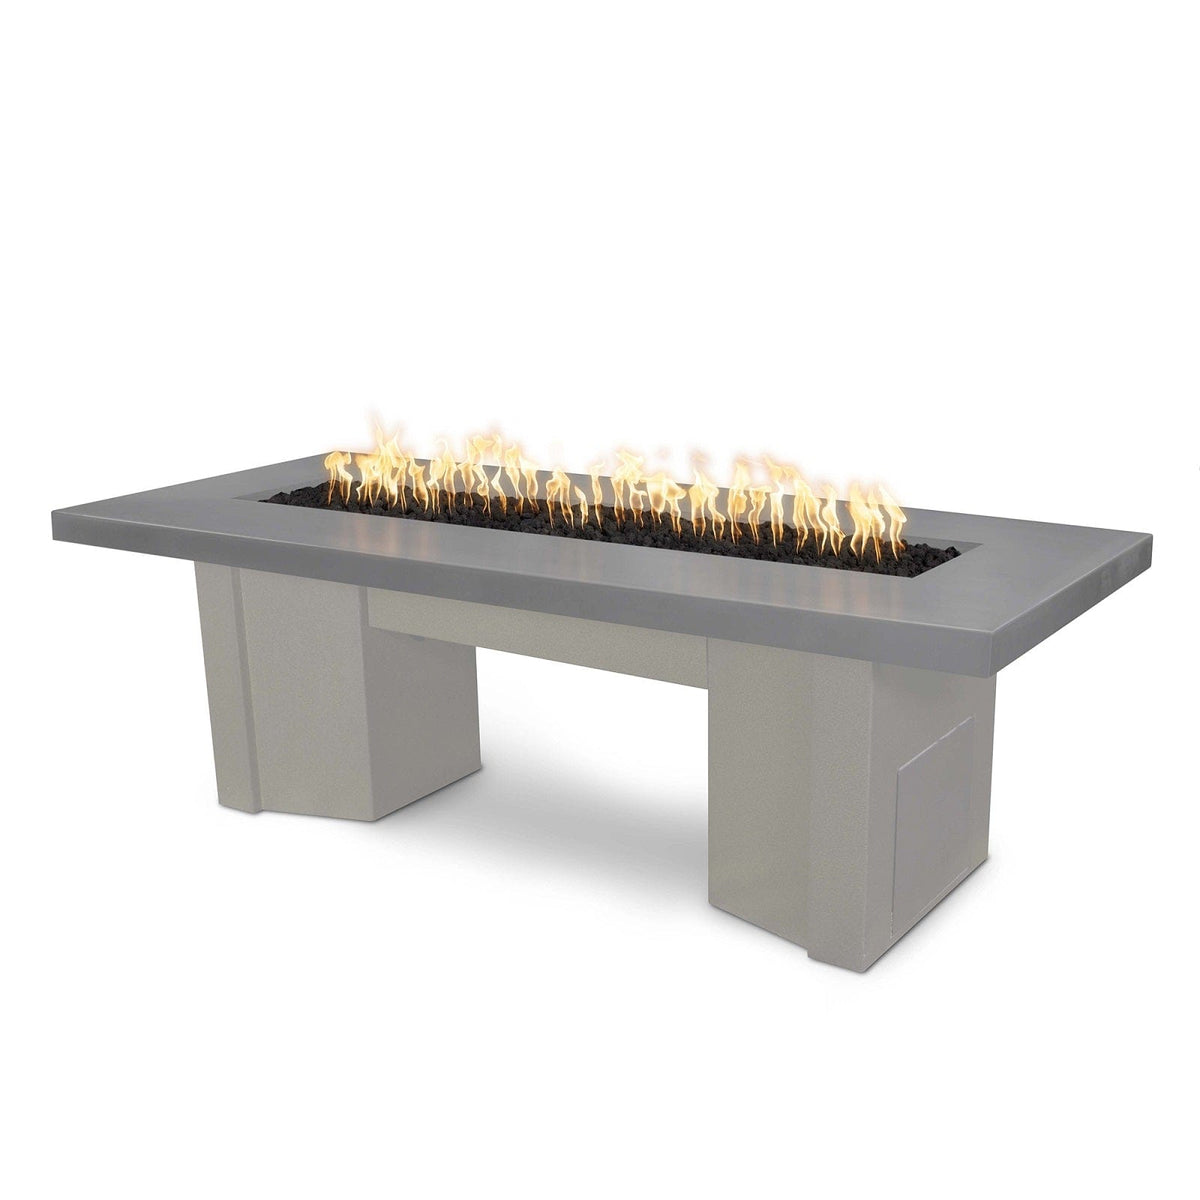 The Outdoor Plus Fire Features Natural Gray (-NGY) / Pewter Powder Coated Steel (-PEW) The Outdoor Plus 78&quot; Alameda Fire Table Smooth Concrete in Natural Gas - Match Lit with Flame Sense System / OPT-ALMGFRC78FSML-NG